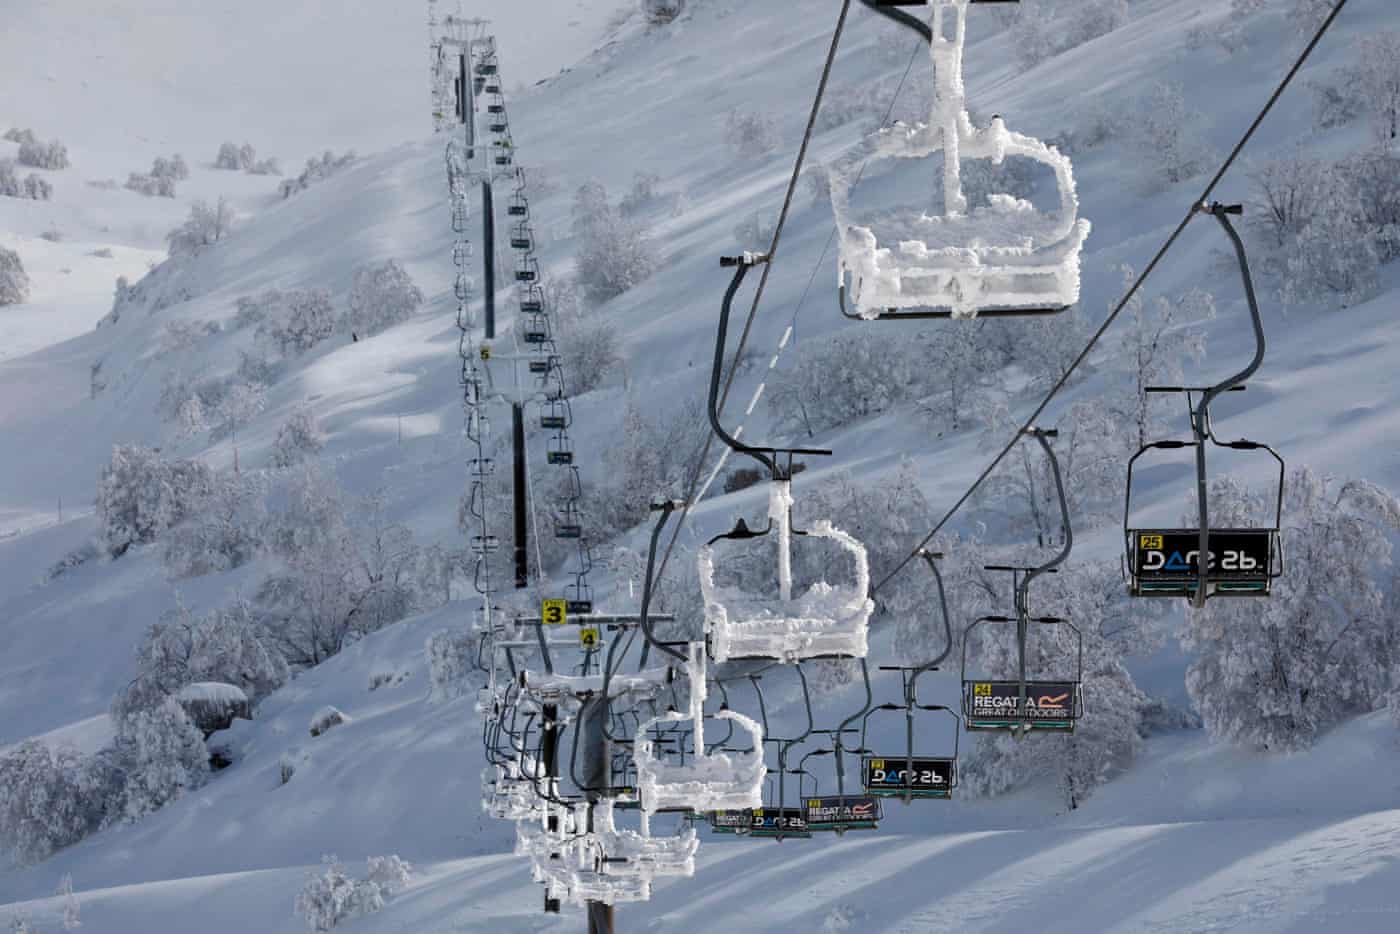 A snow-covered cable car at the Mount Hermon ski resort, in the Israeli-occupied Golan Heights